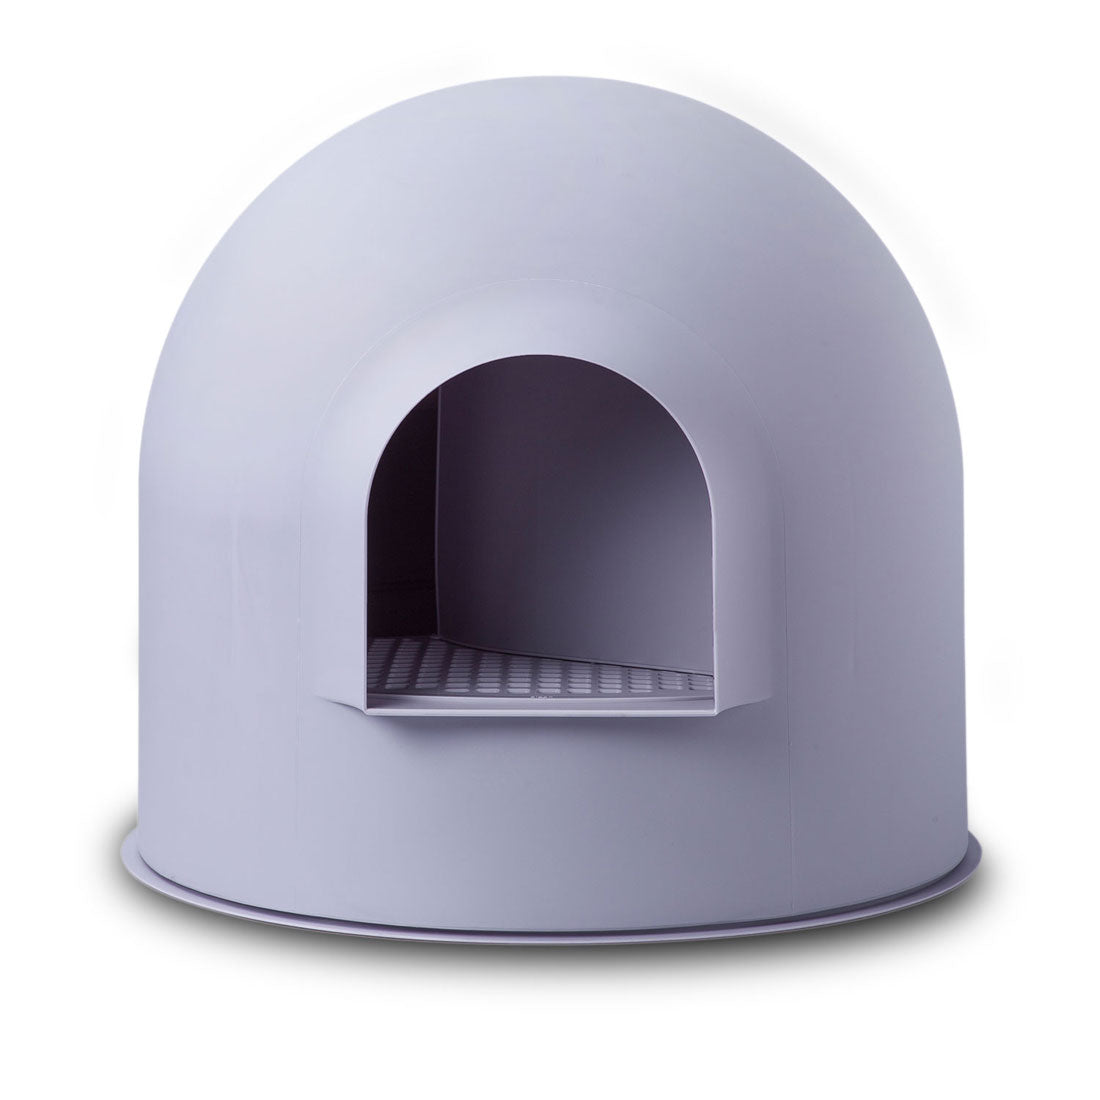 Pidan Igloo Snow House Portable Hooded Cat Toilet Litter Box Tray House with Scoop - purple